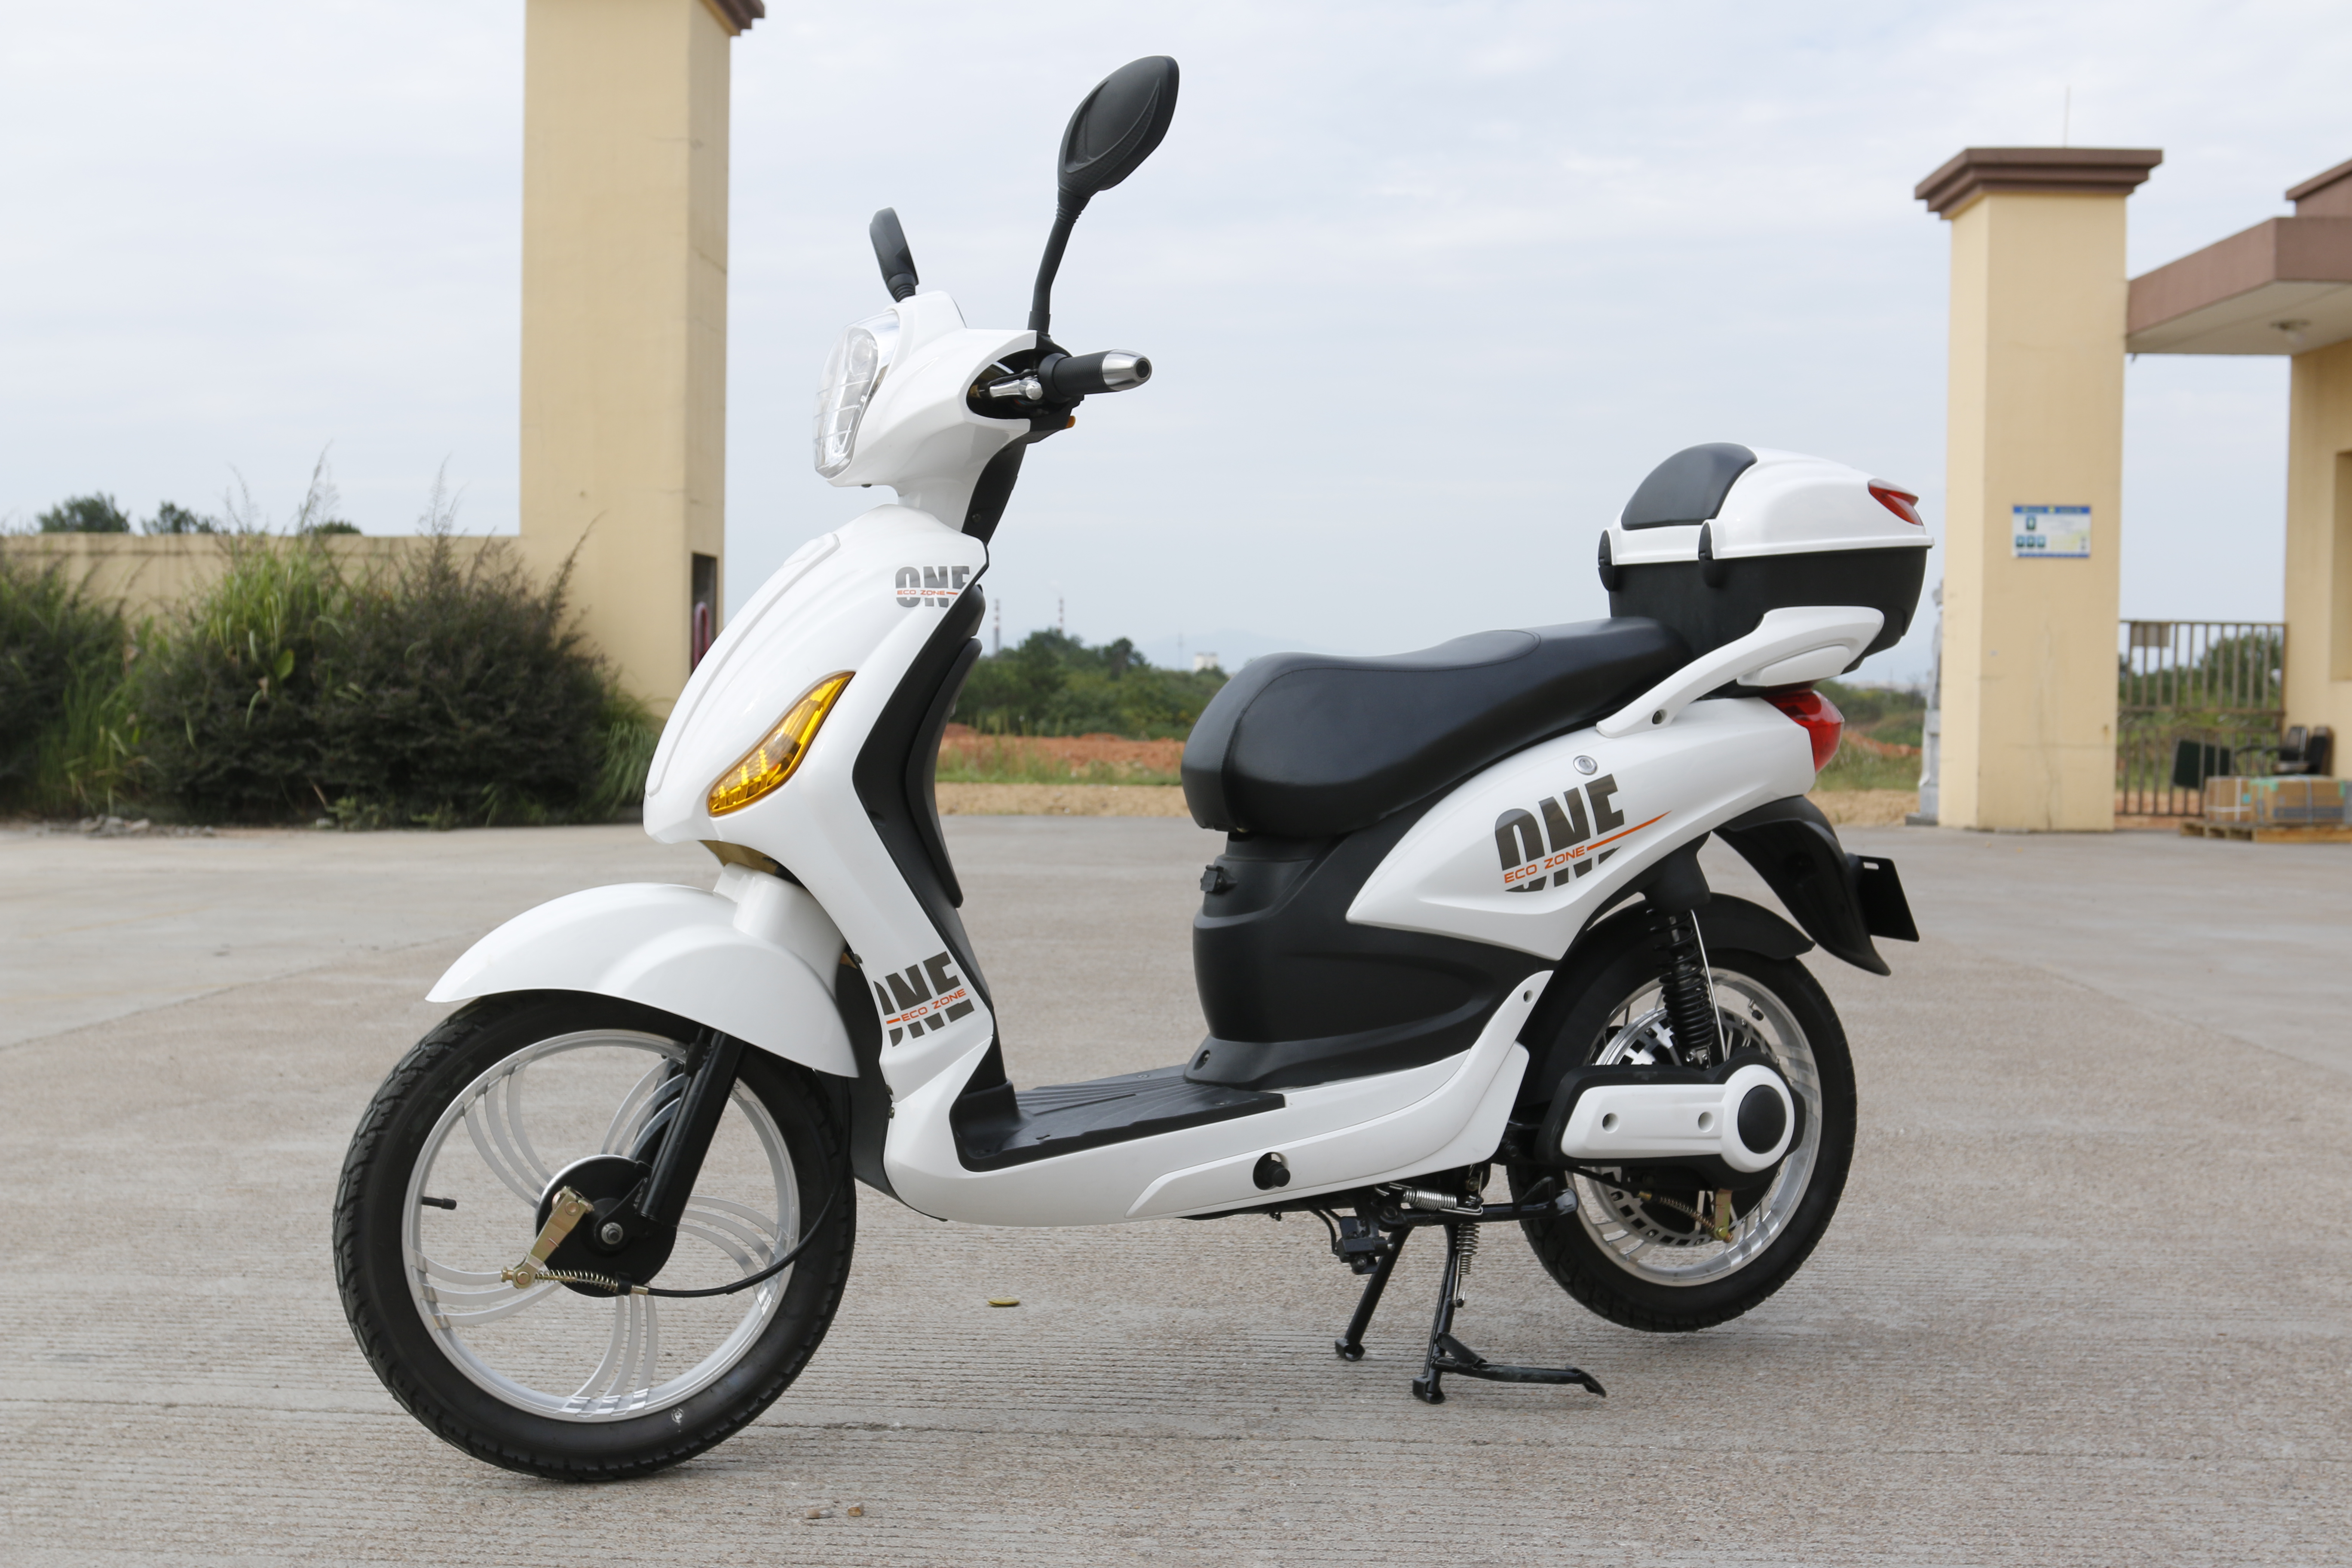 250W motor Electric bike with step city rode EEC